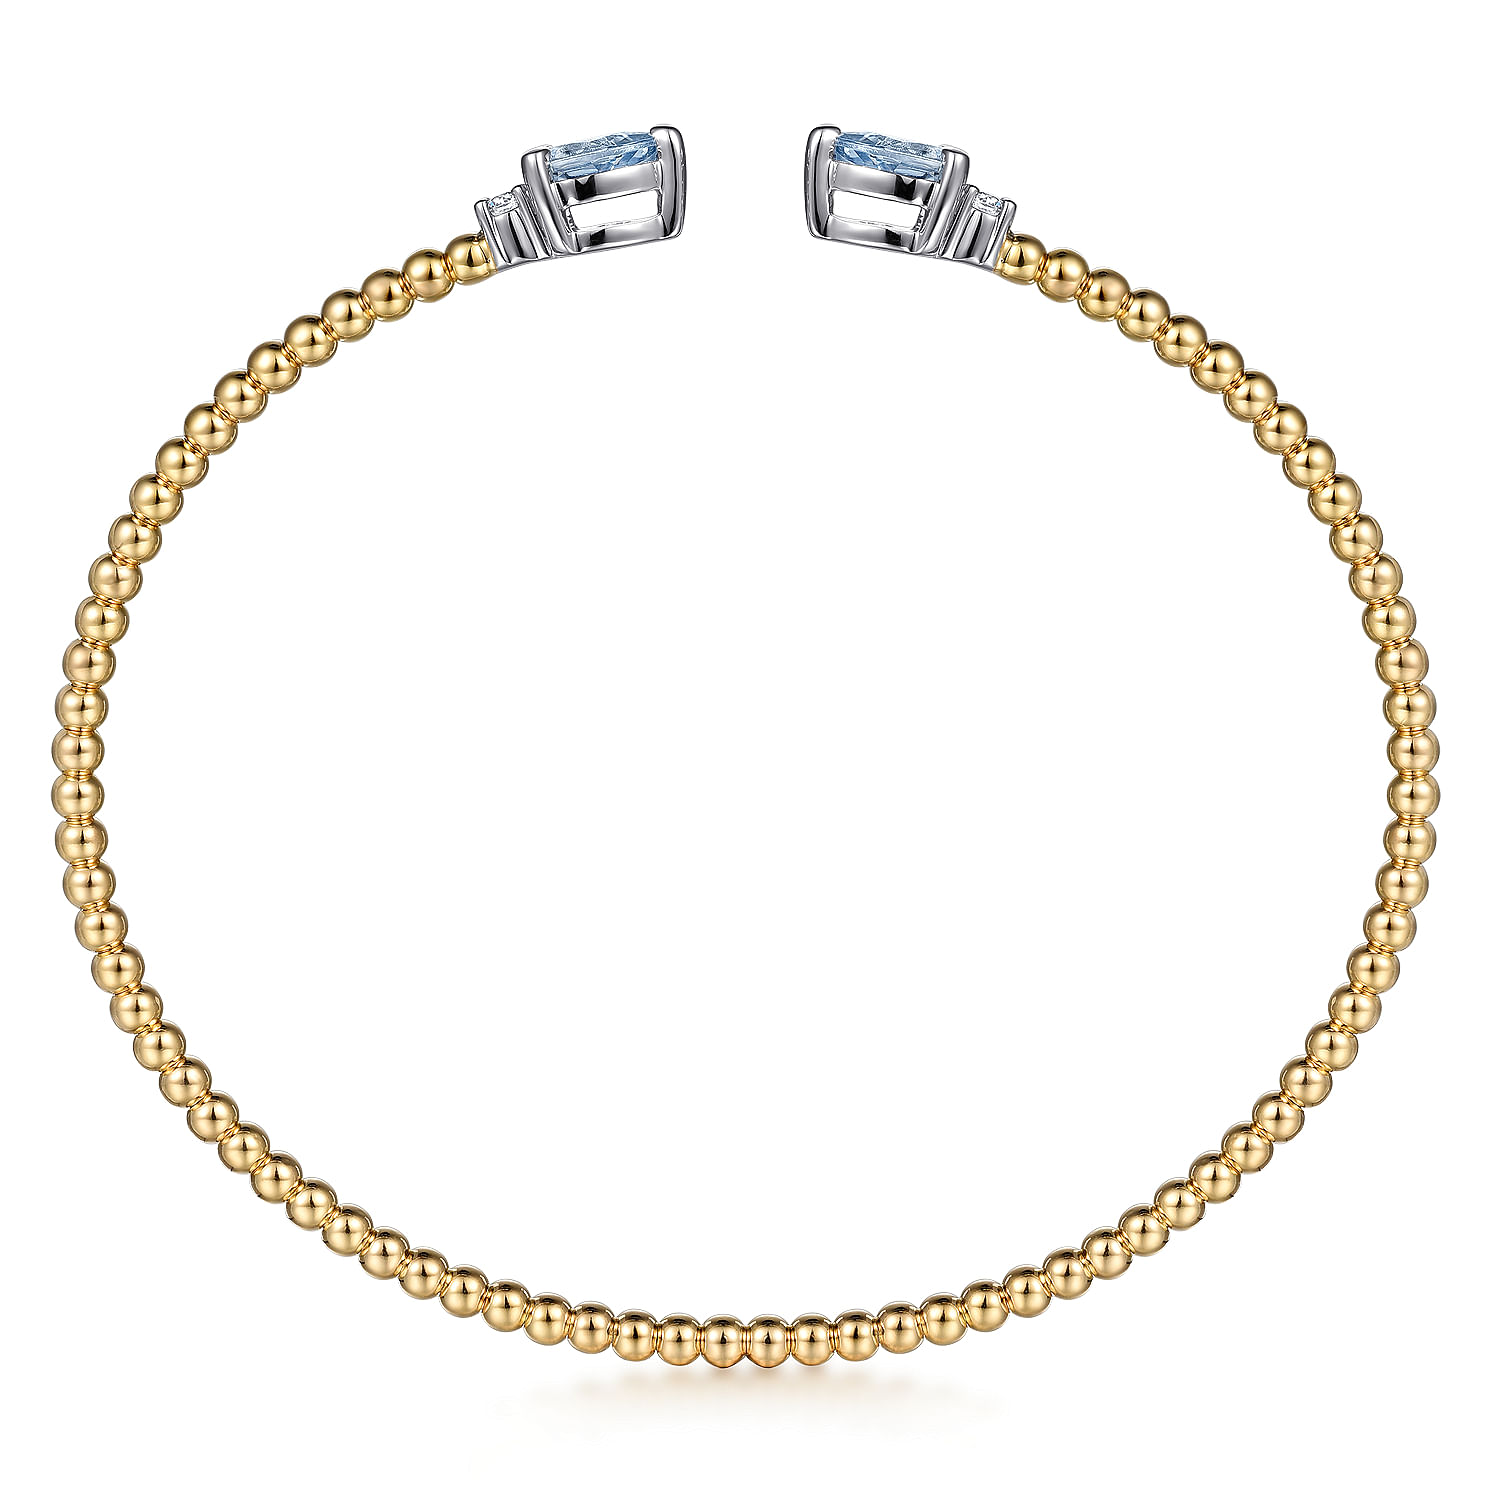 14K White & Yellow Gold Bujukan Open Cuff Bracelet with Aquamarine and Diamond End Caps